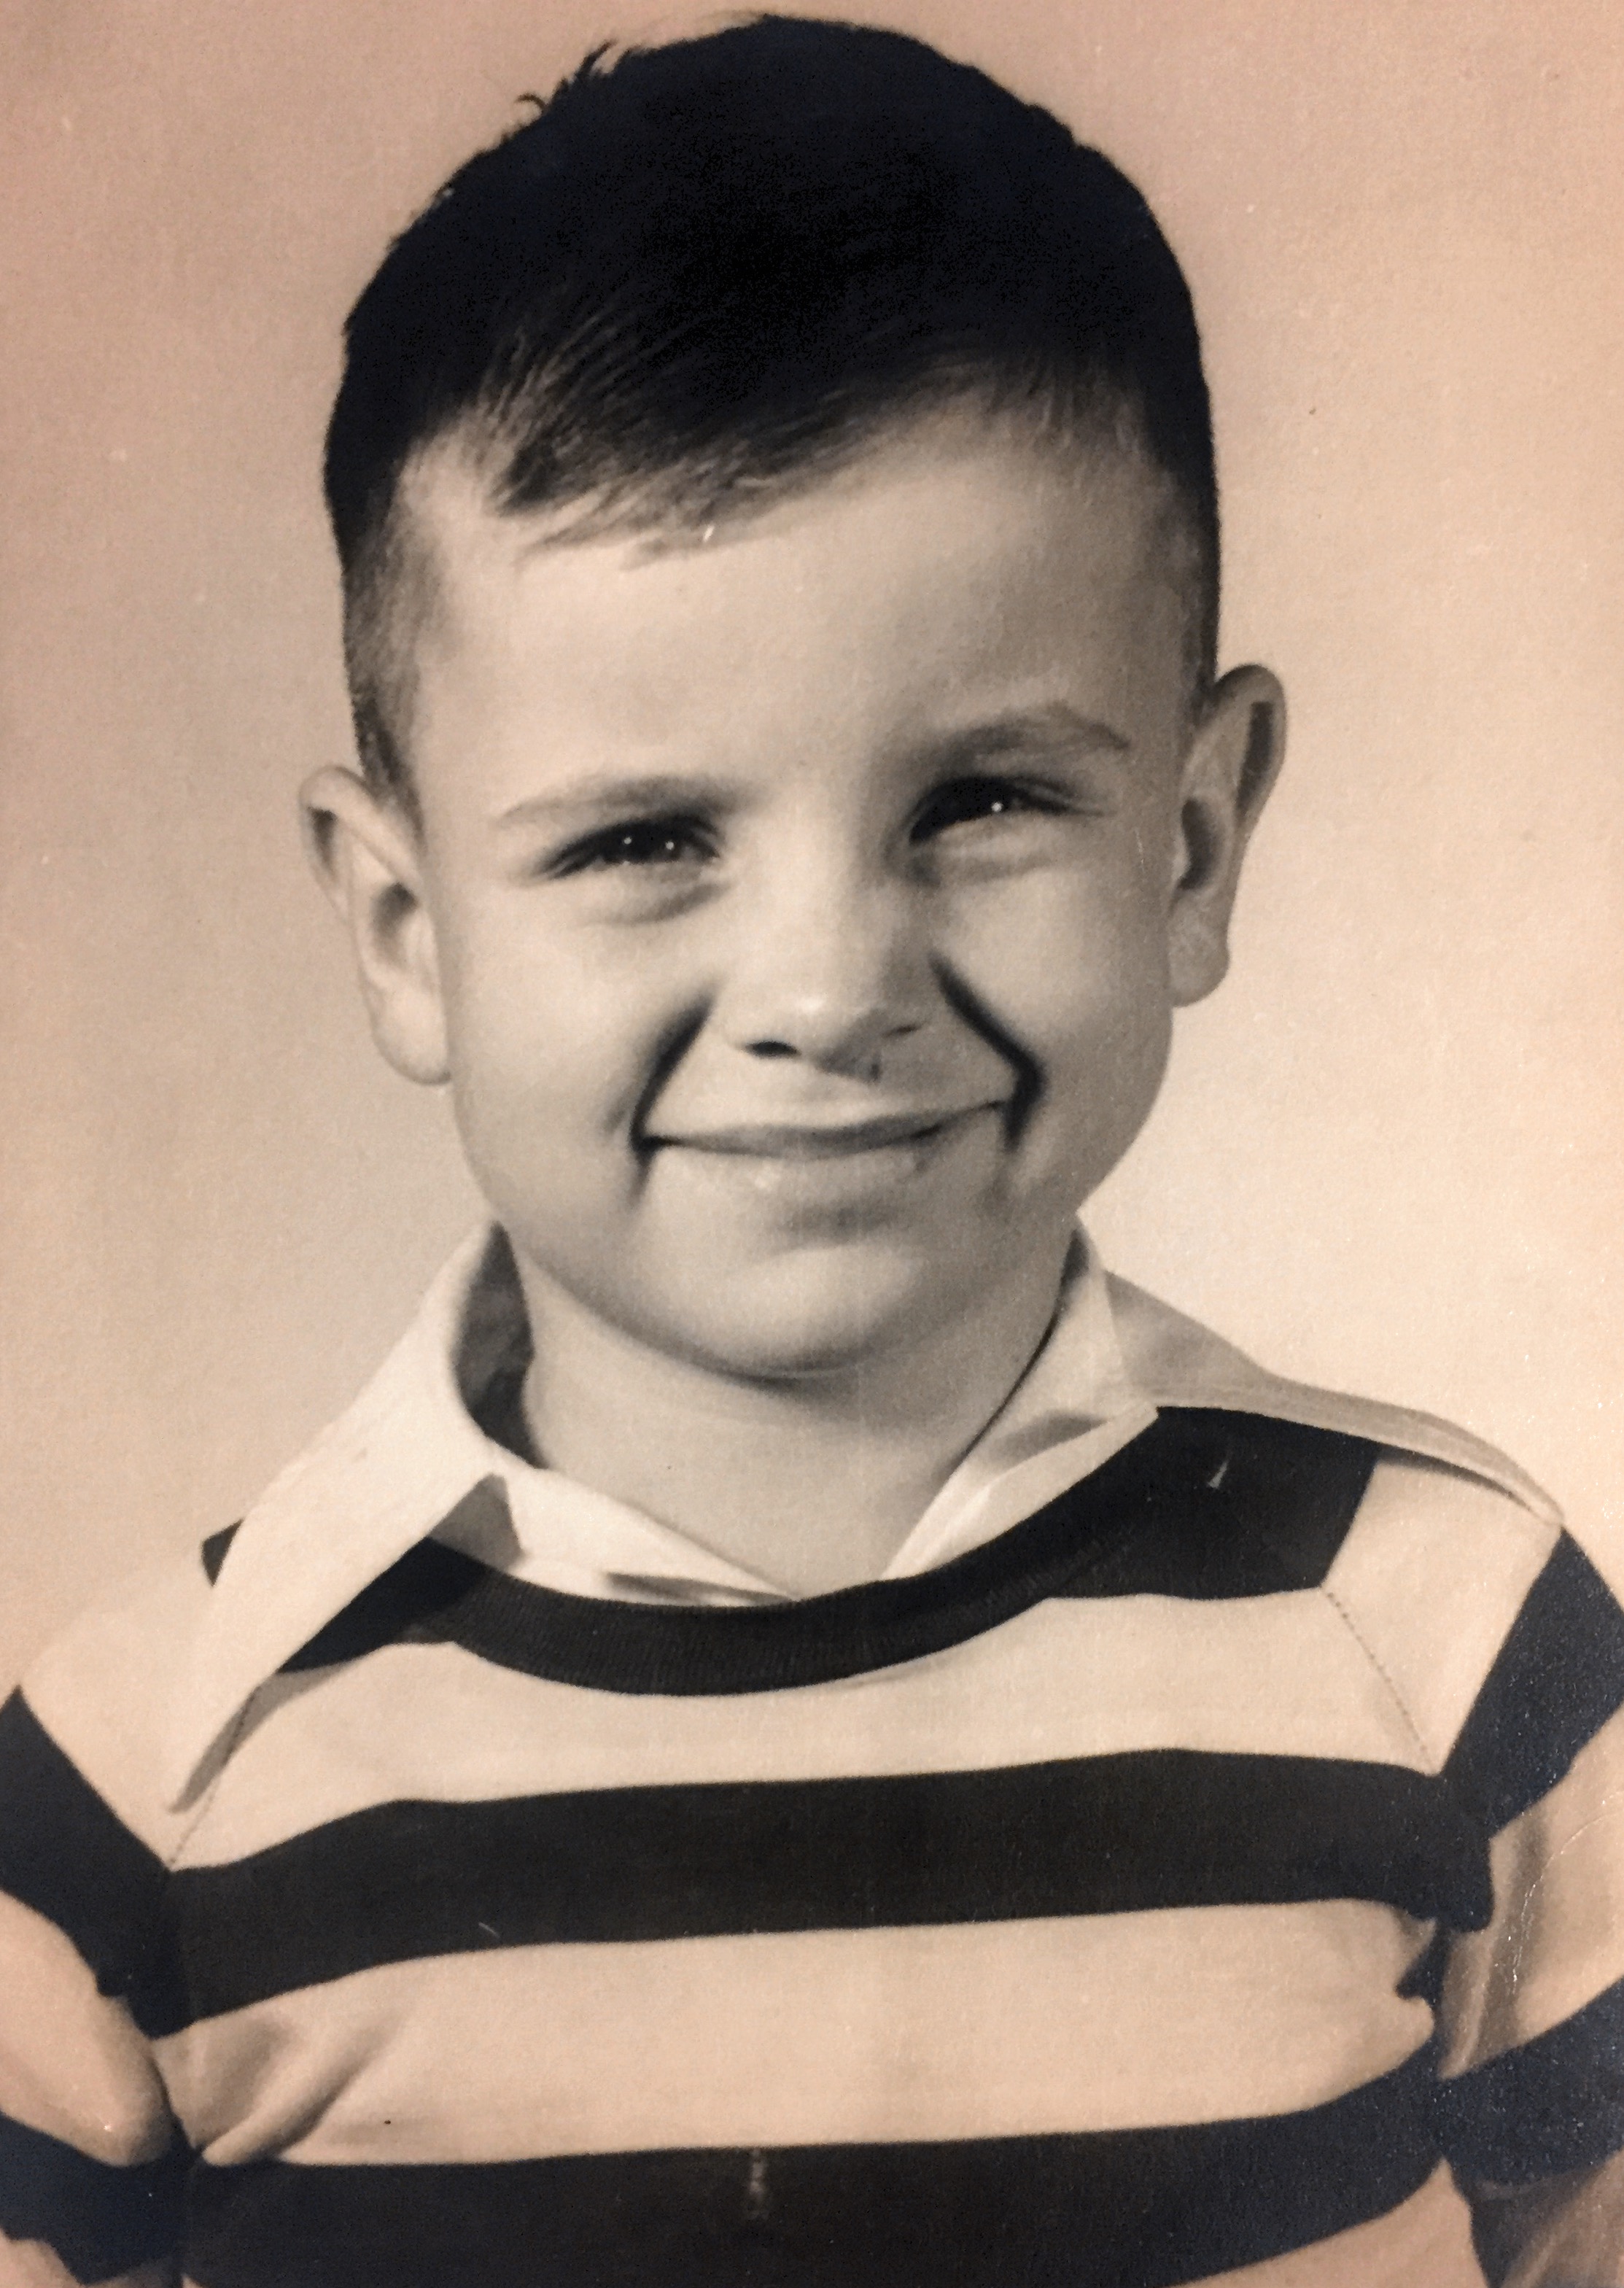 Ronnie Smith 1st Grade School Photo. There was no Kindergarten offered in Prichard, AL in those days, so 1951-1952 was his first introduction to school.